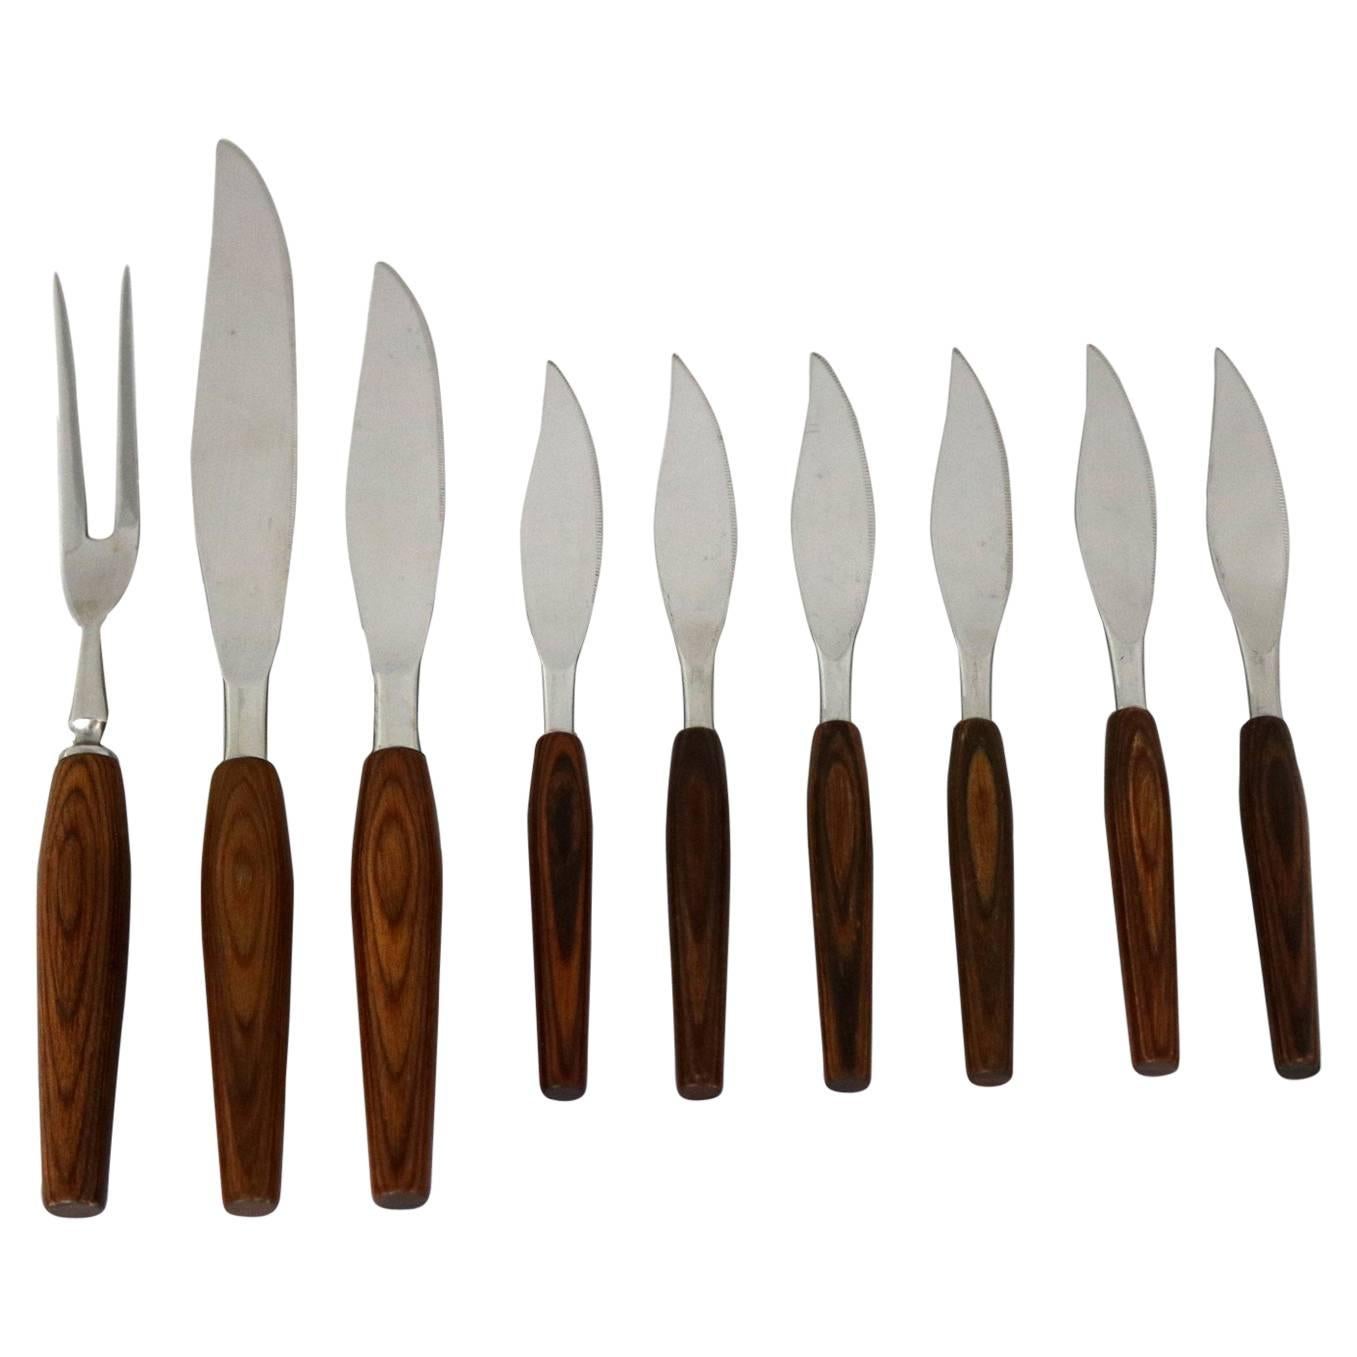 Regent Sheffield Cutlery Teak and Stainless Mode Danish Steak Knives and Serving